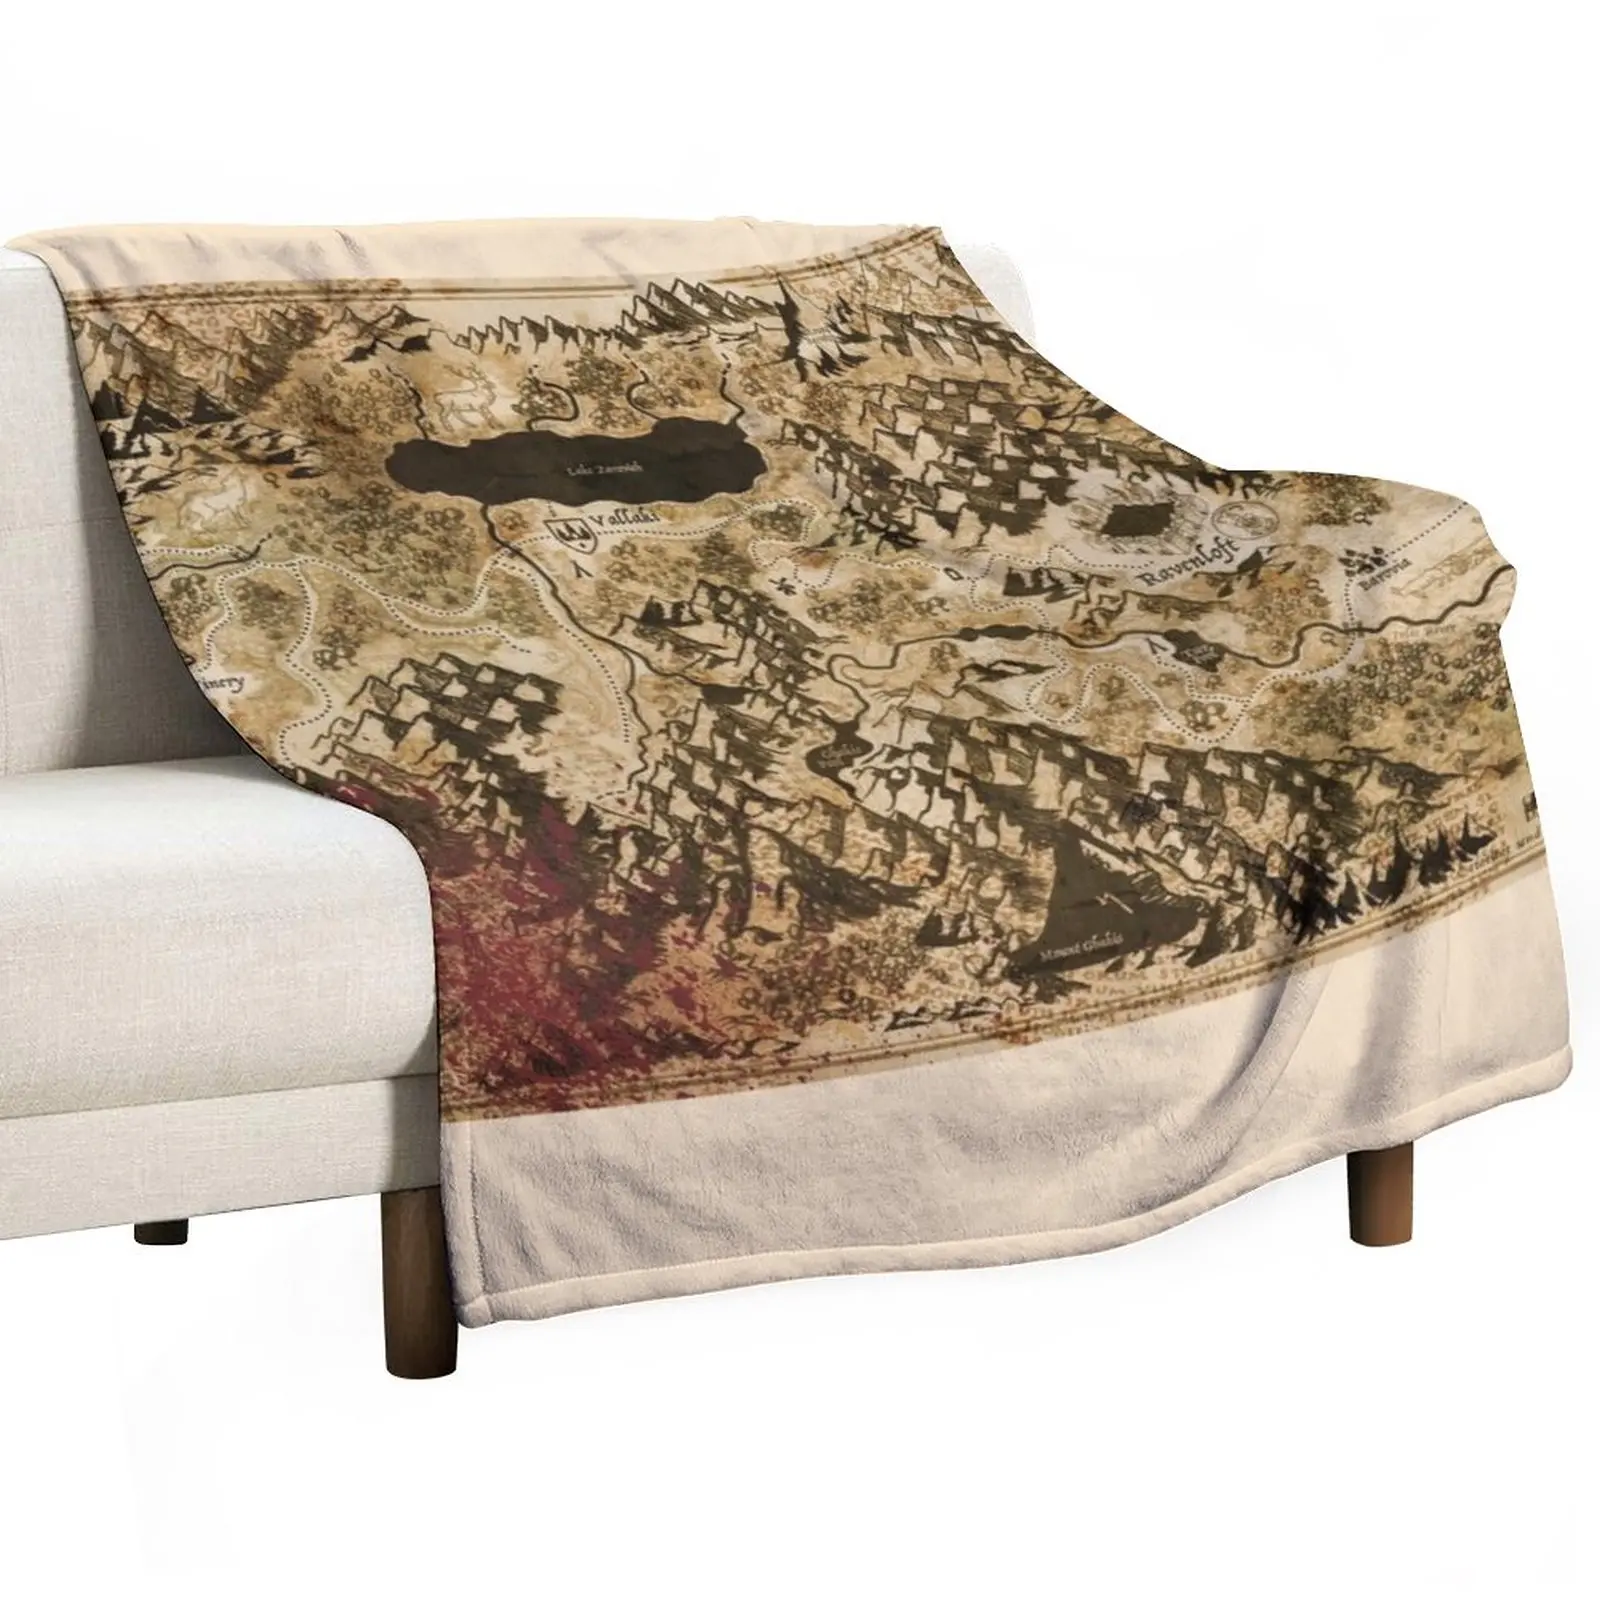 

Dr. Rudolf Van Richten's Annotated Map Of Barovia Throw Blanket Sofas Moving Blanket Cute Blanket Plaid Flannel Fabric